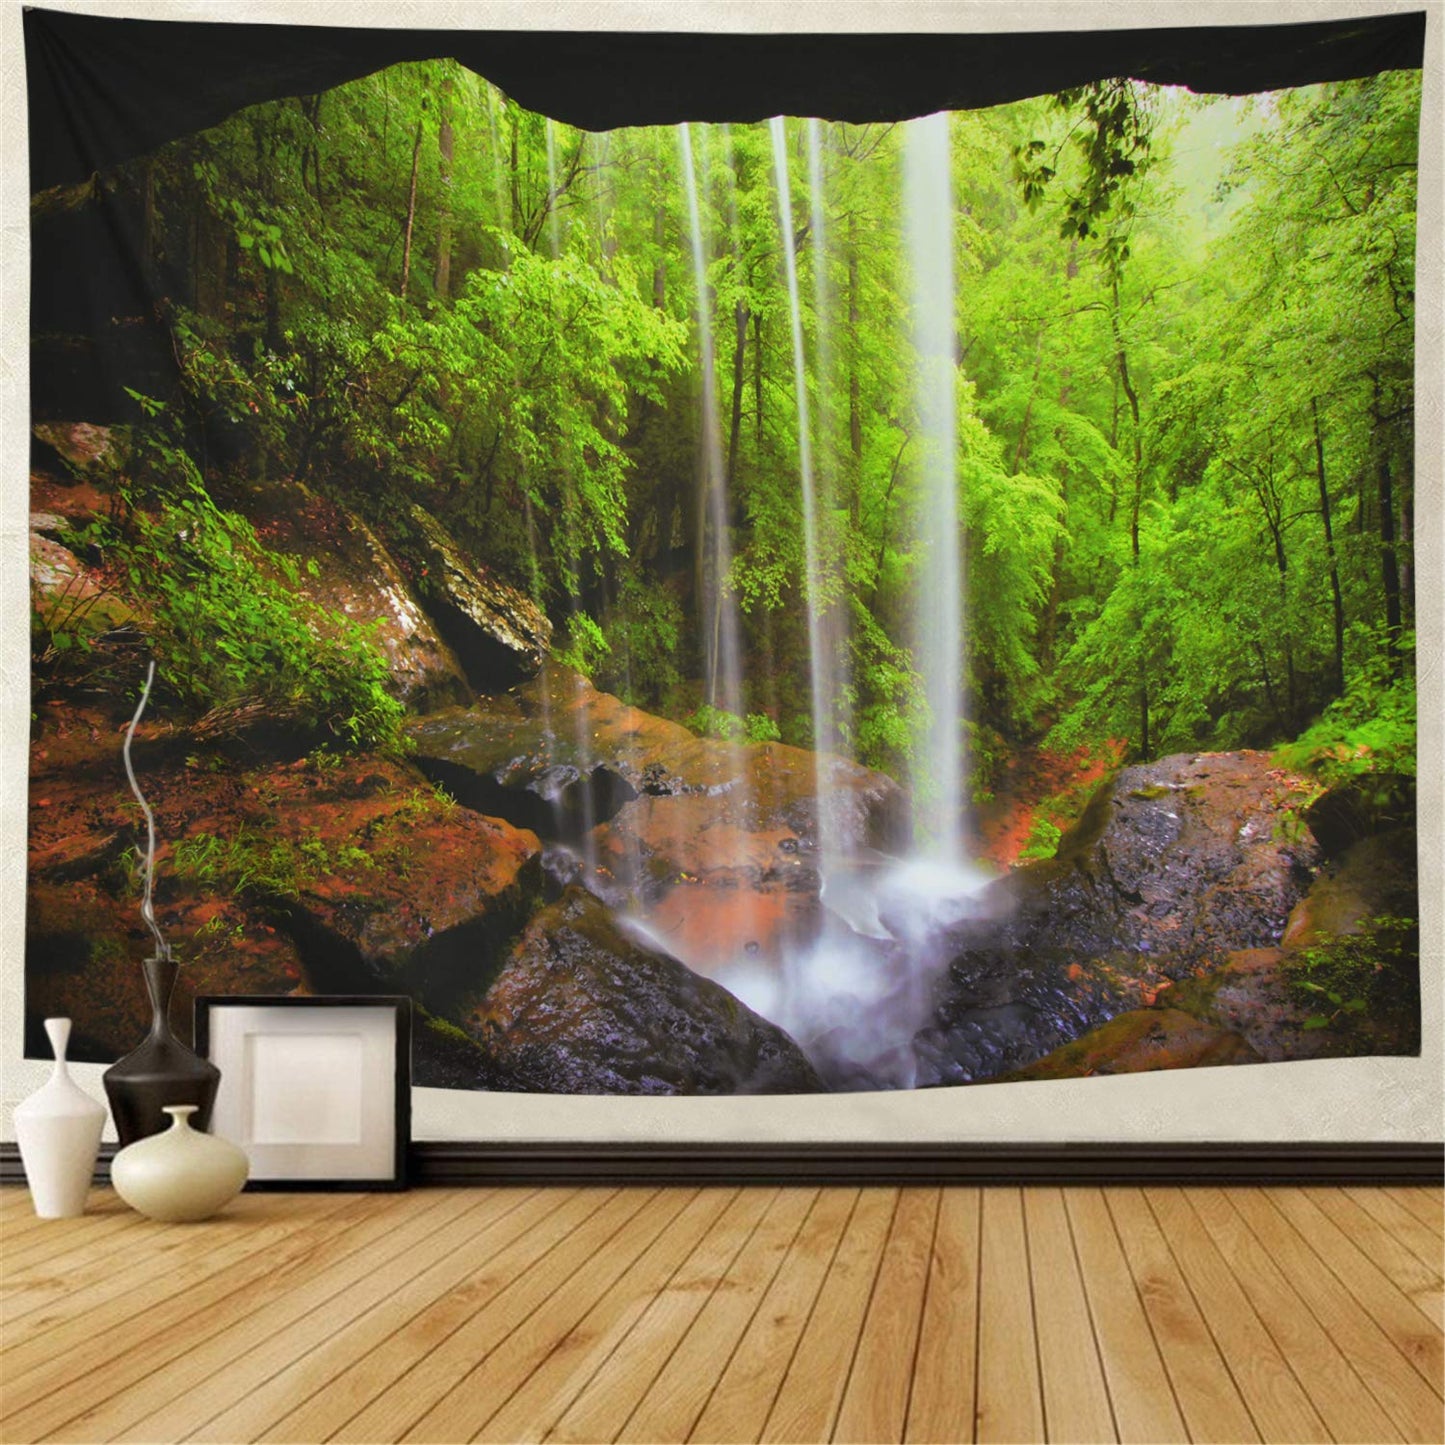 Big Tapestry Beautiful Natural Forest Large Wall Hanging Hippie